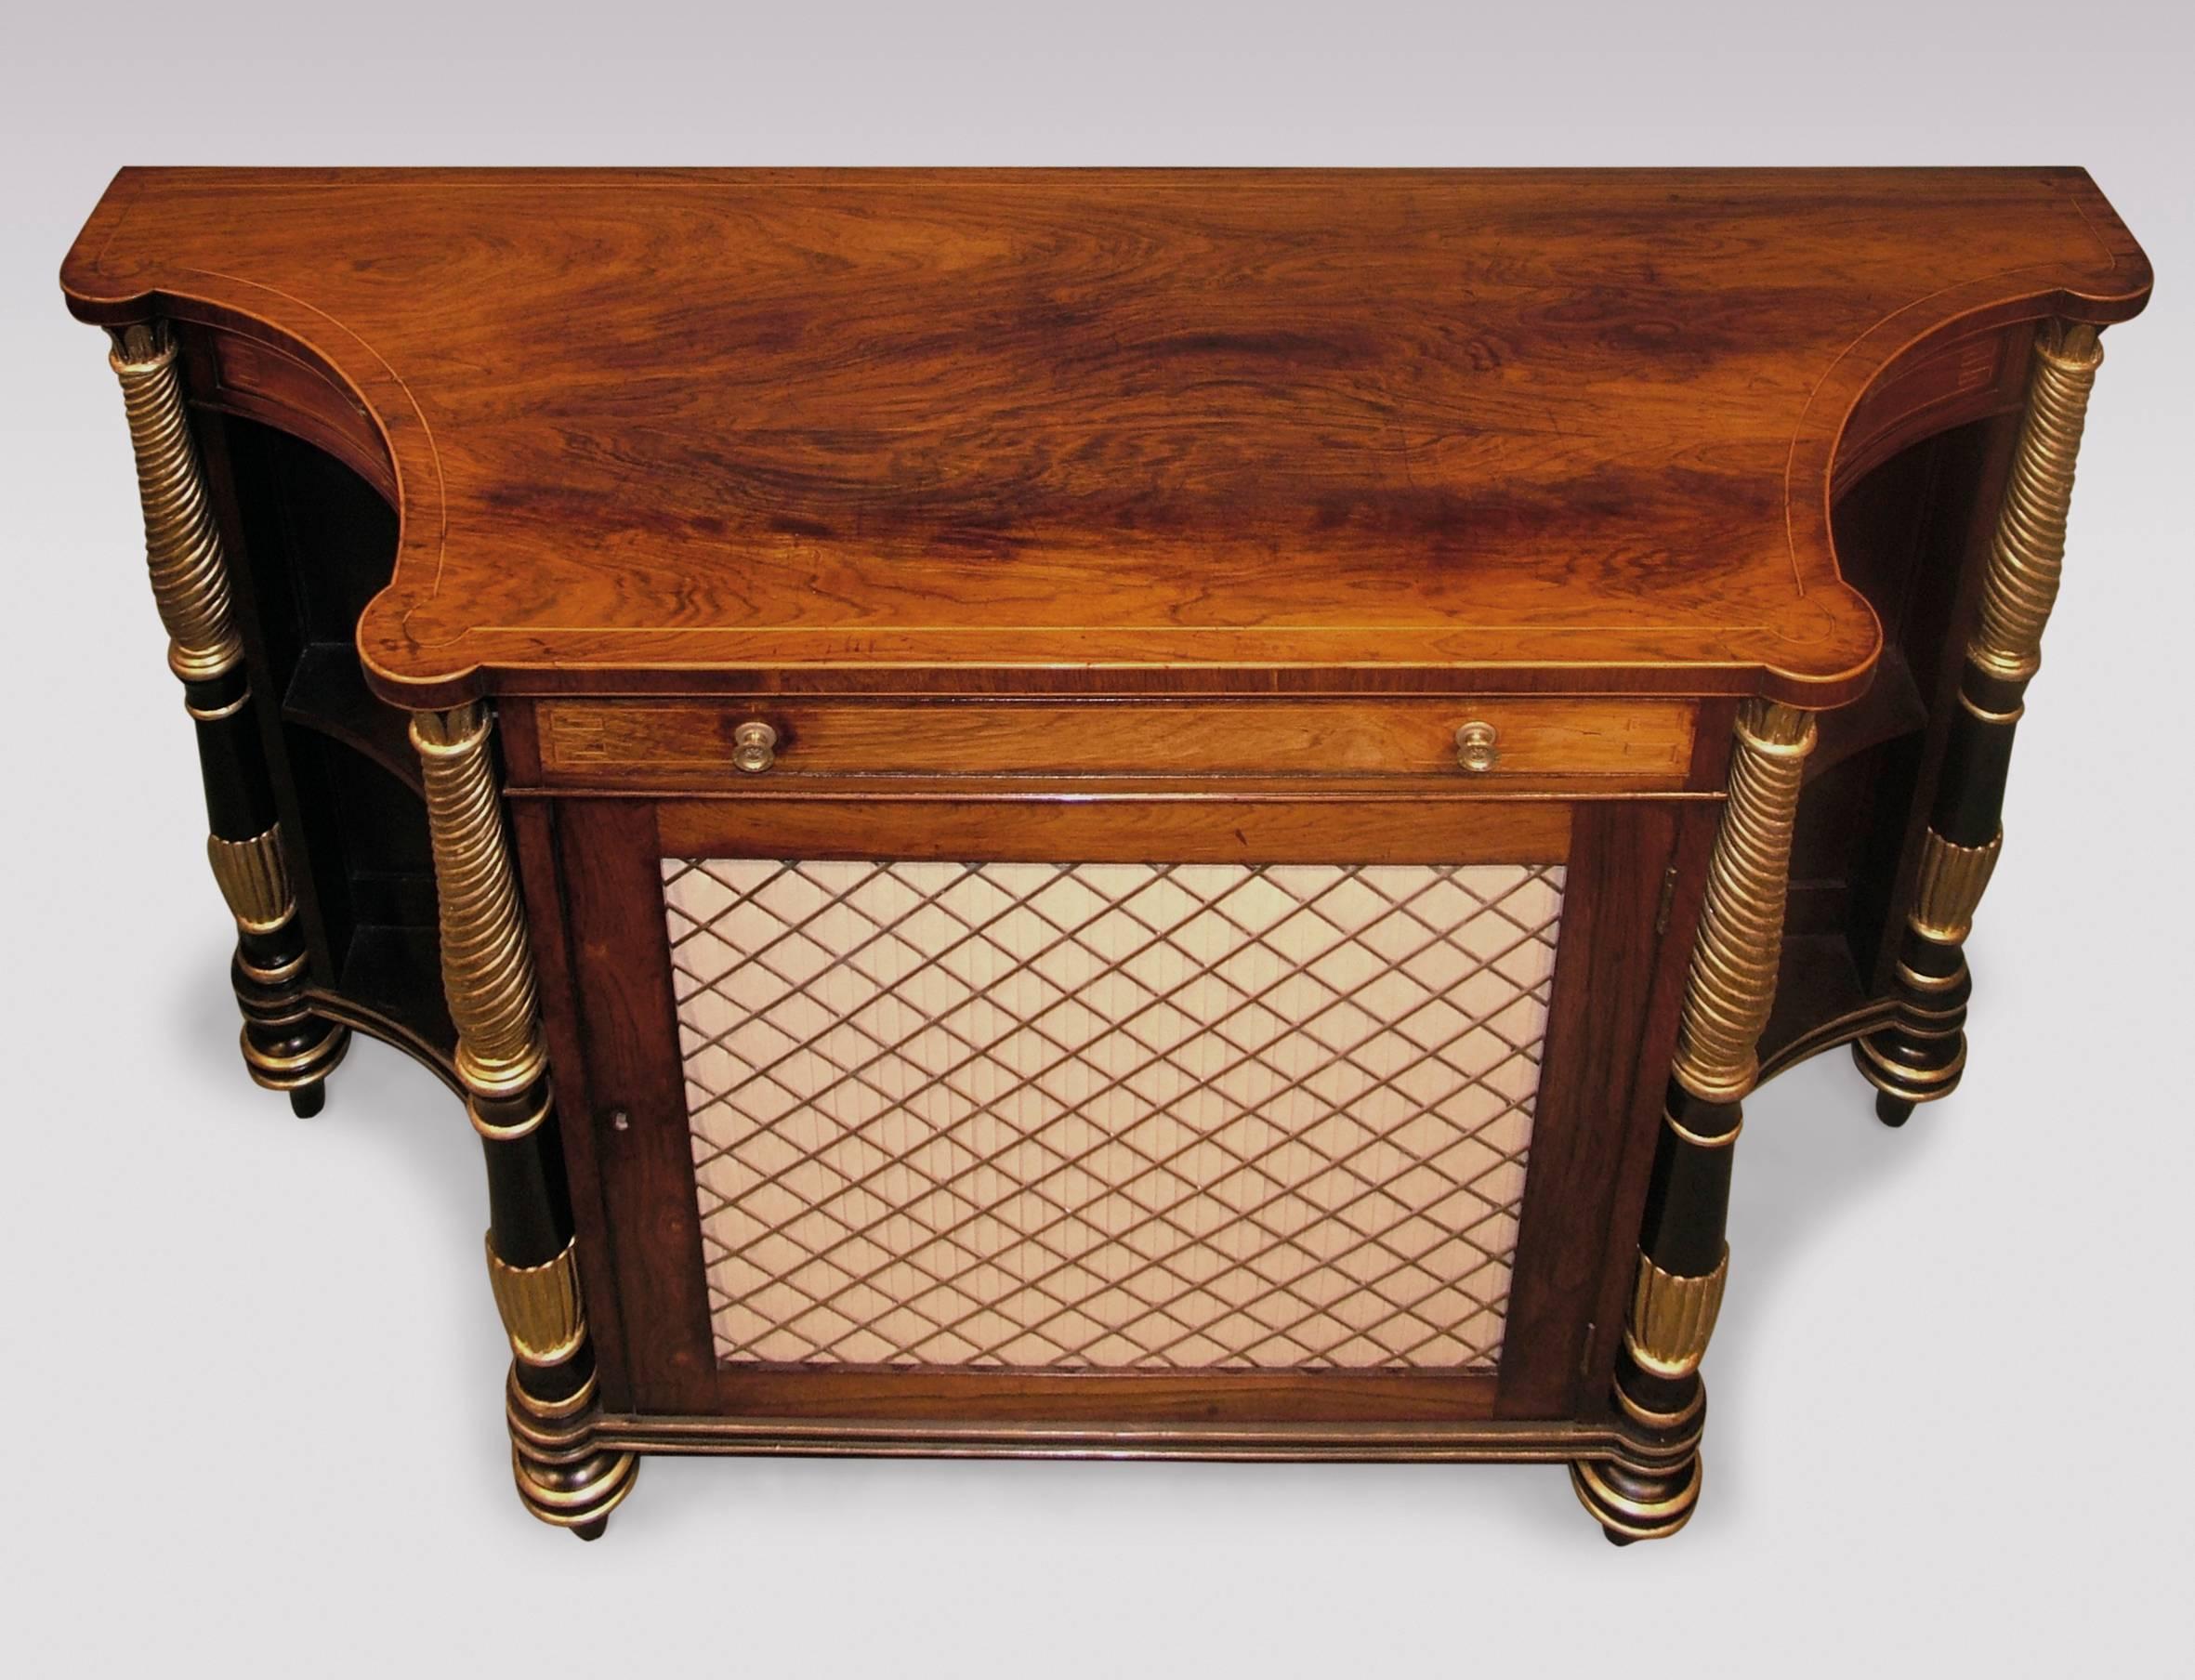 Polished Early 19th Century Regency Rosewood, Giltwood and Black Painted Chiffonier